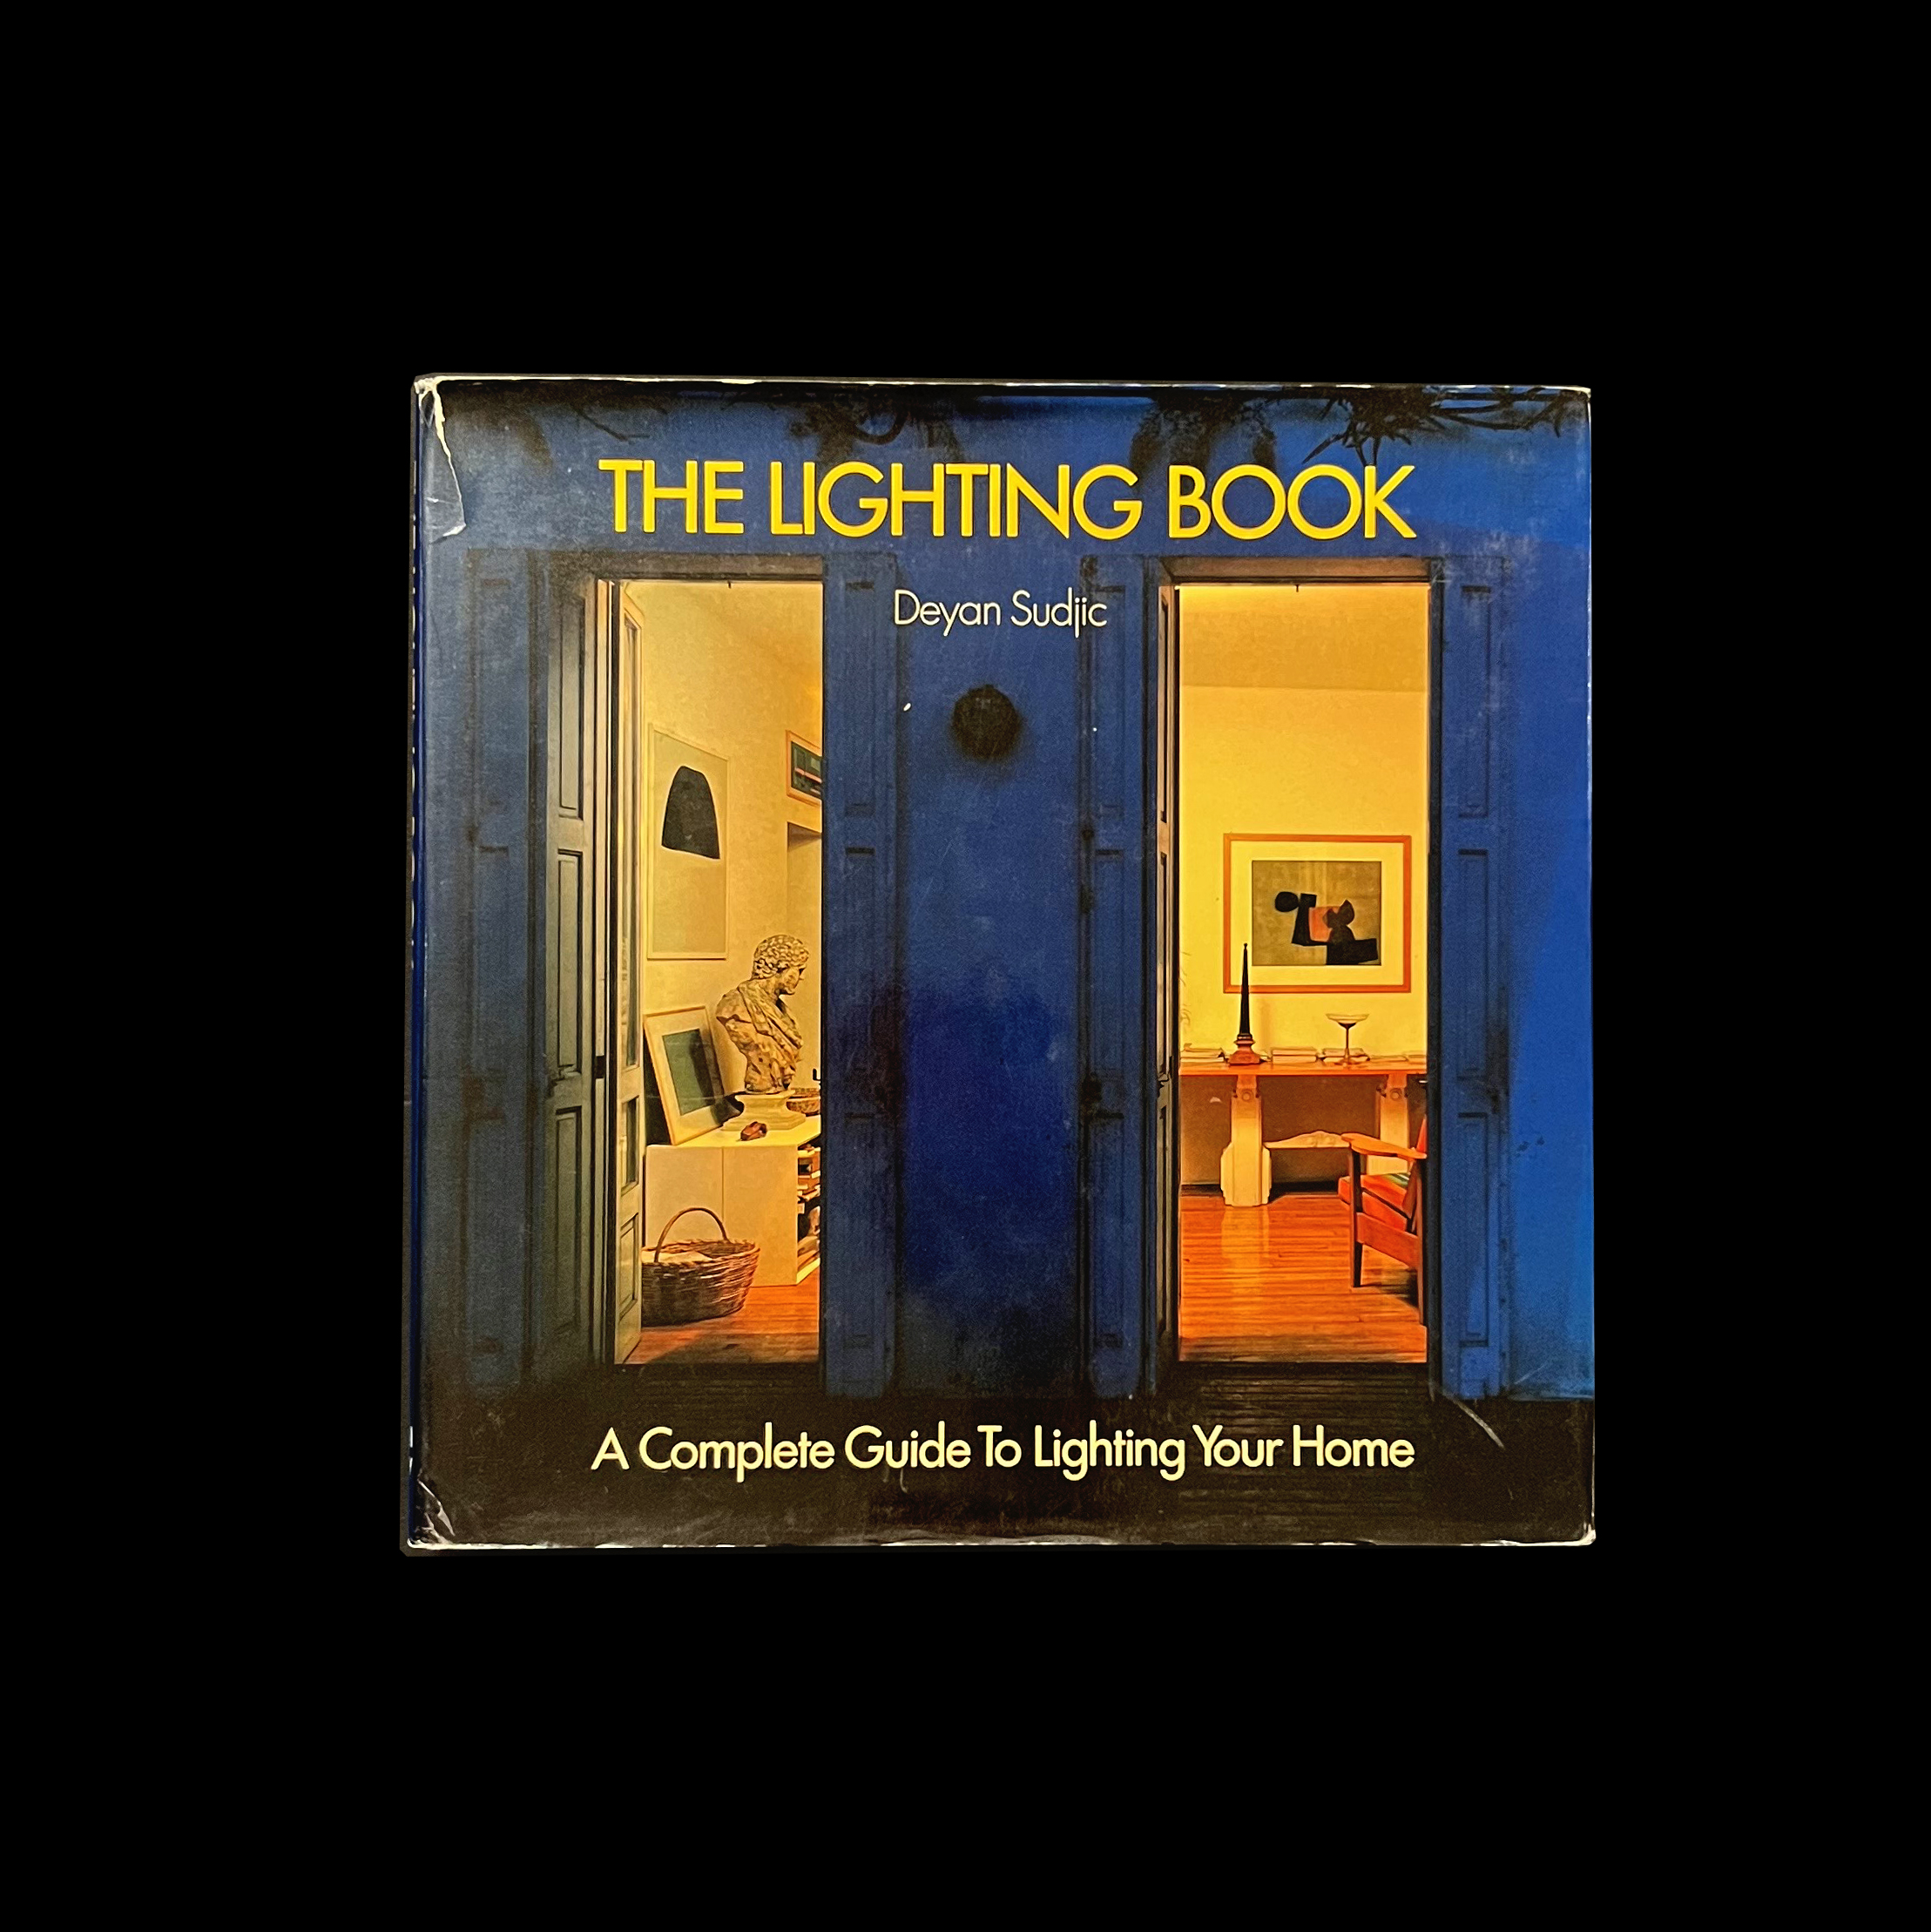 The Lighting Book: a complete guide to lighting your home